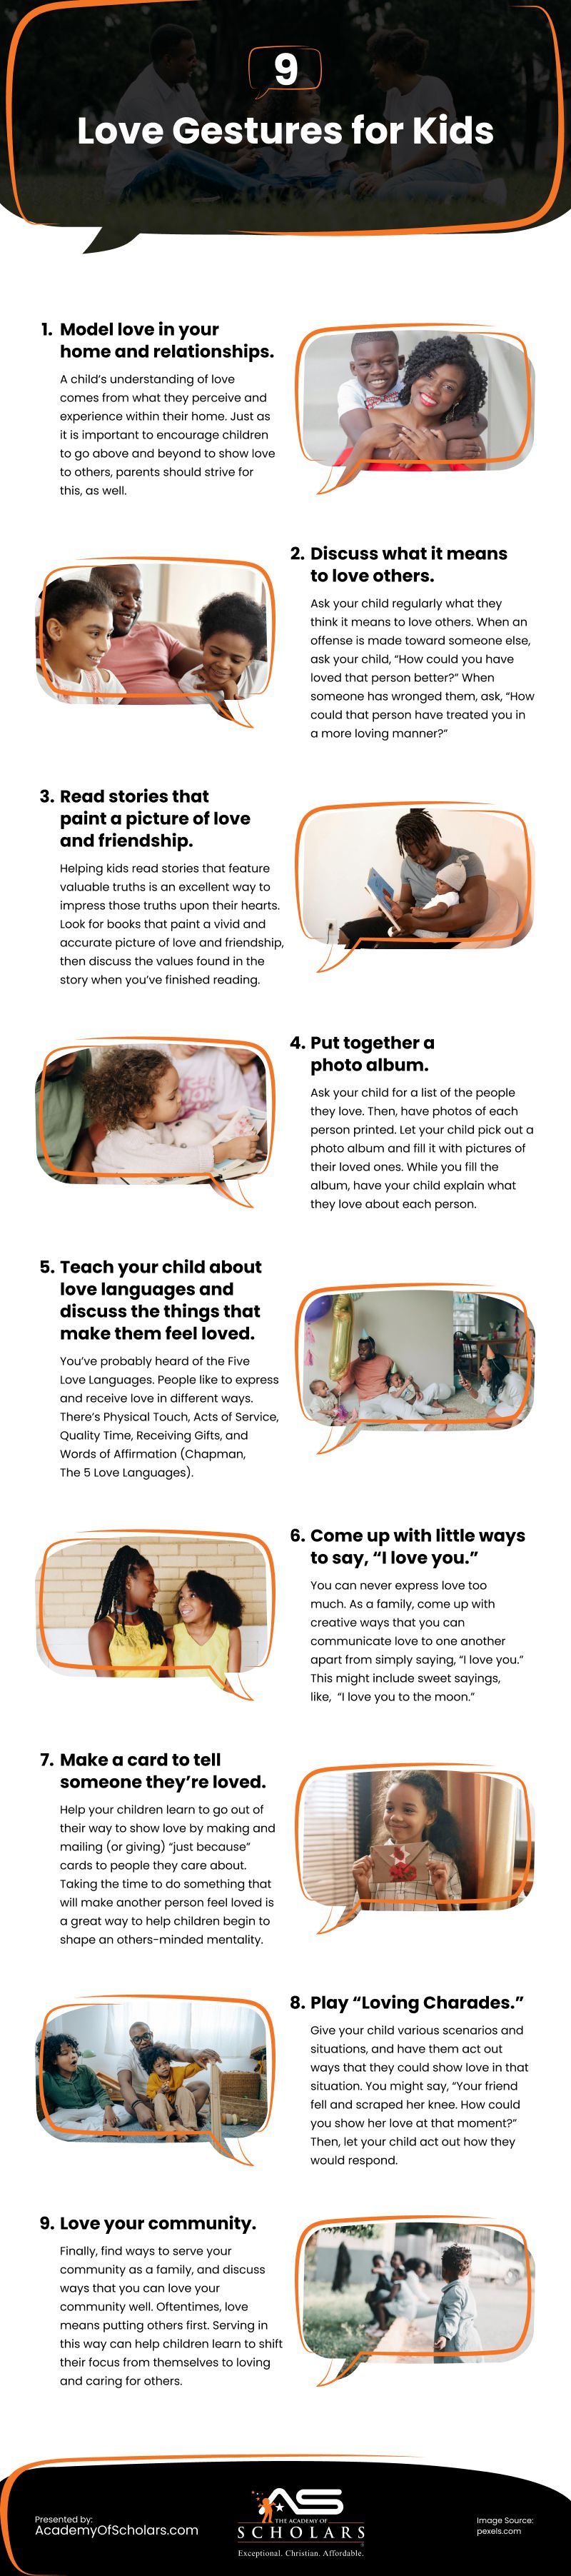 9 Love Gestures for Kids Infographic